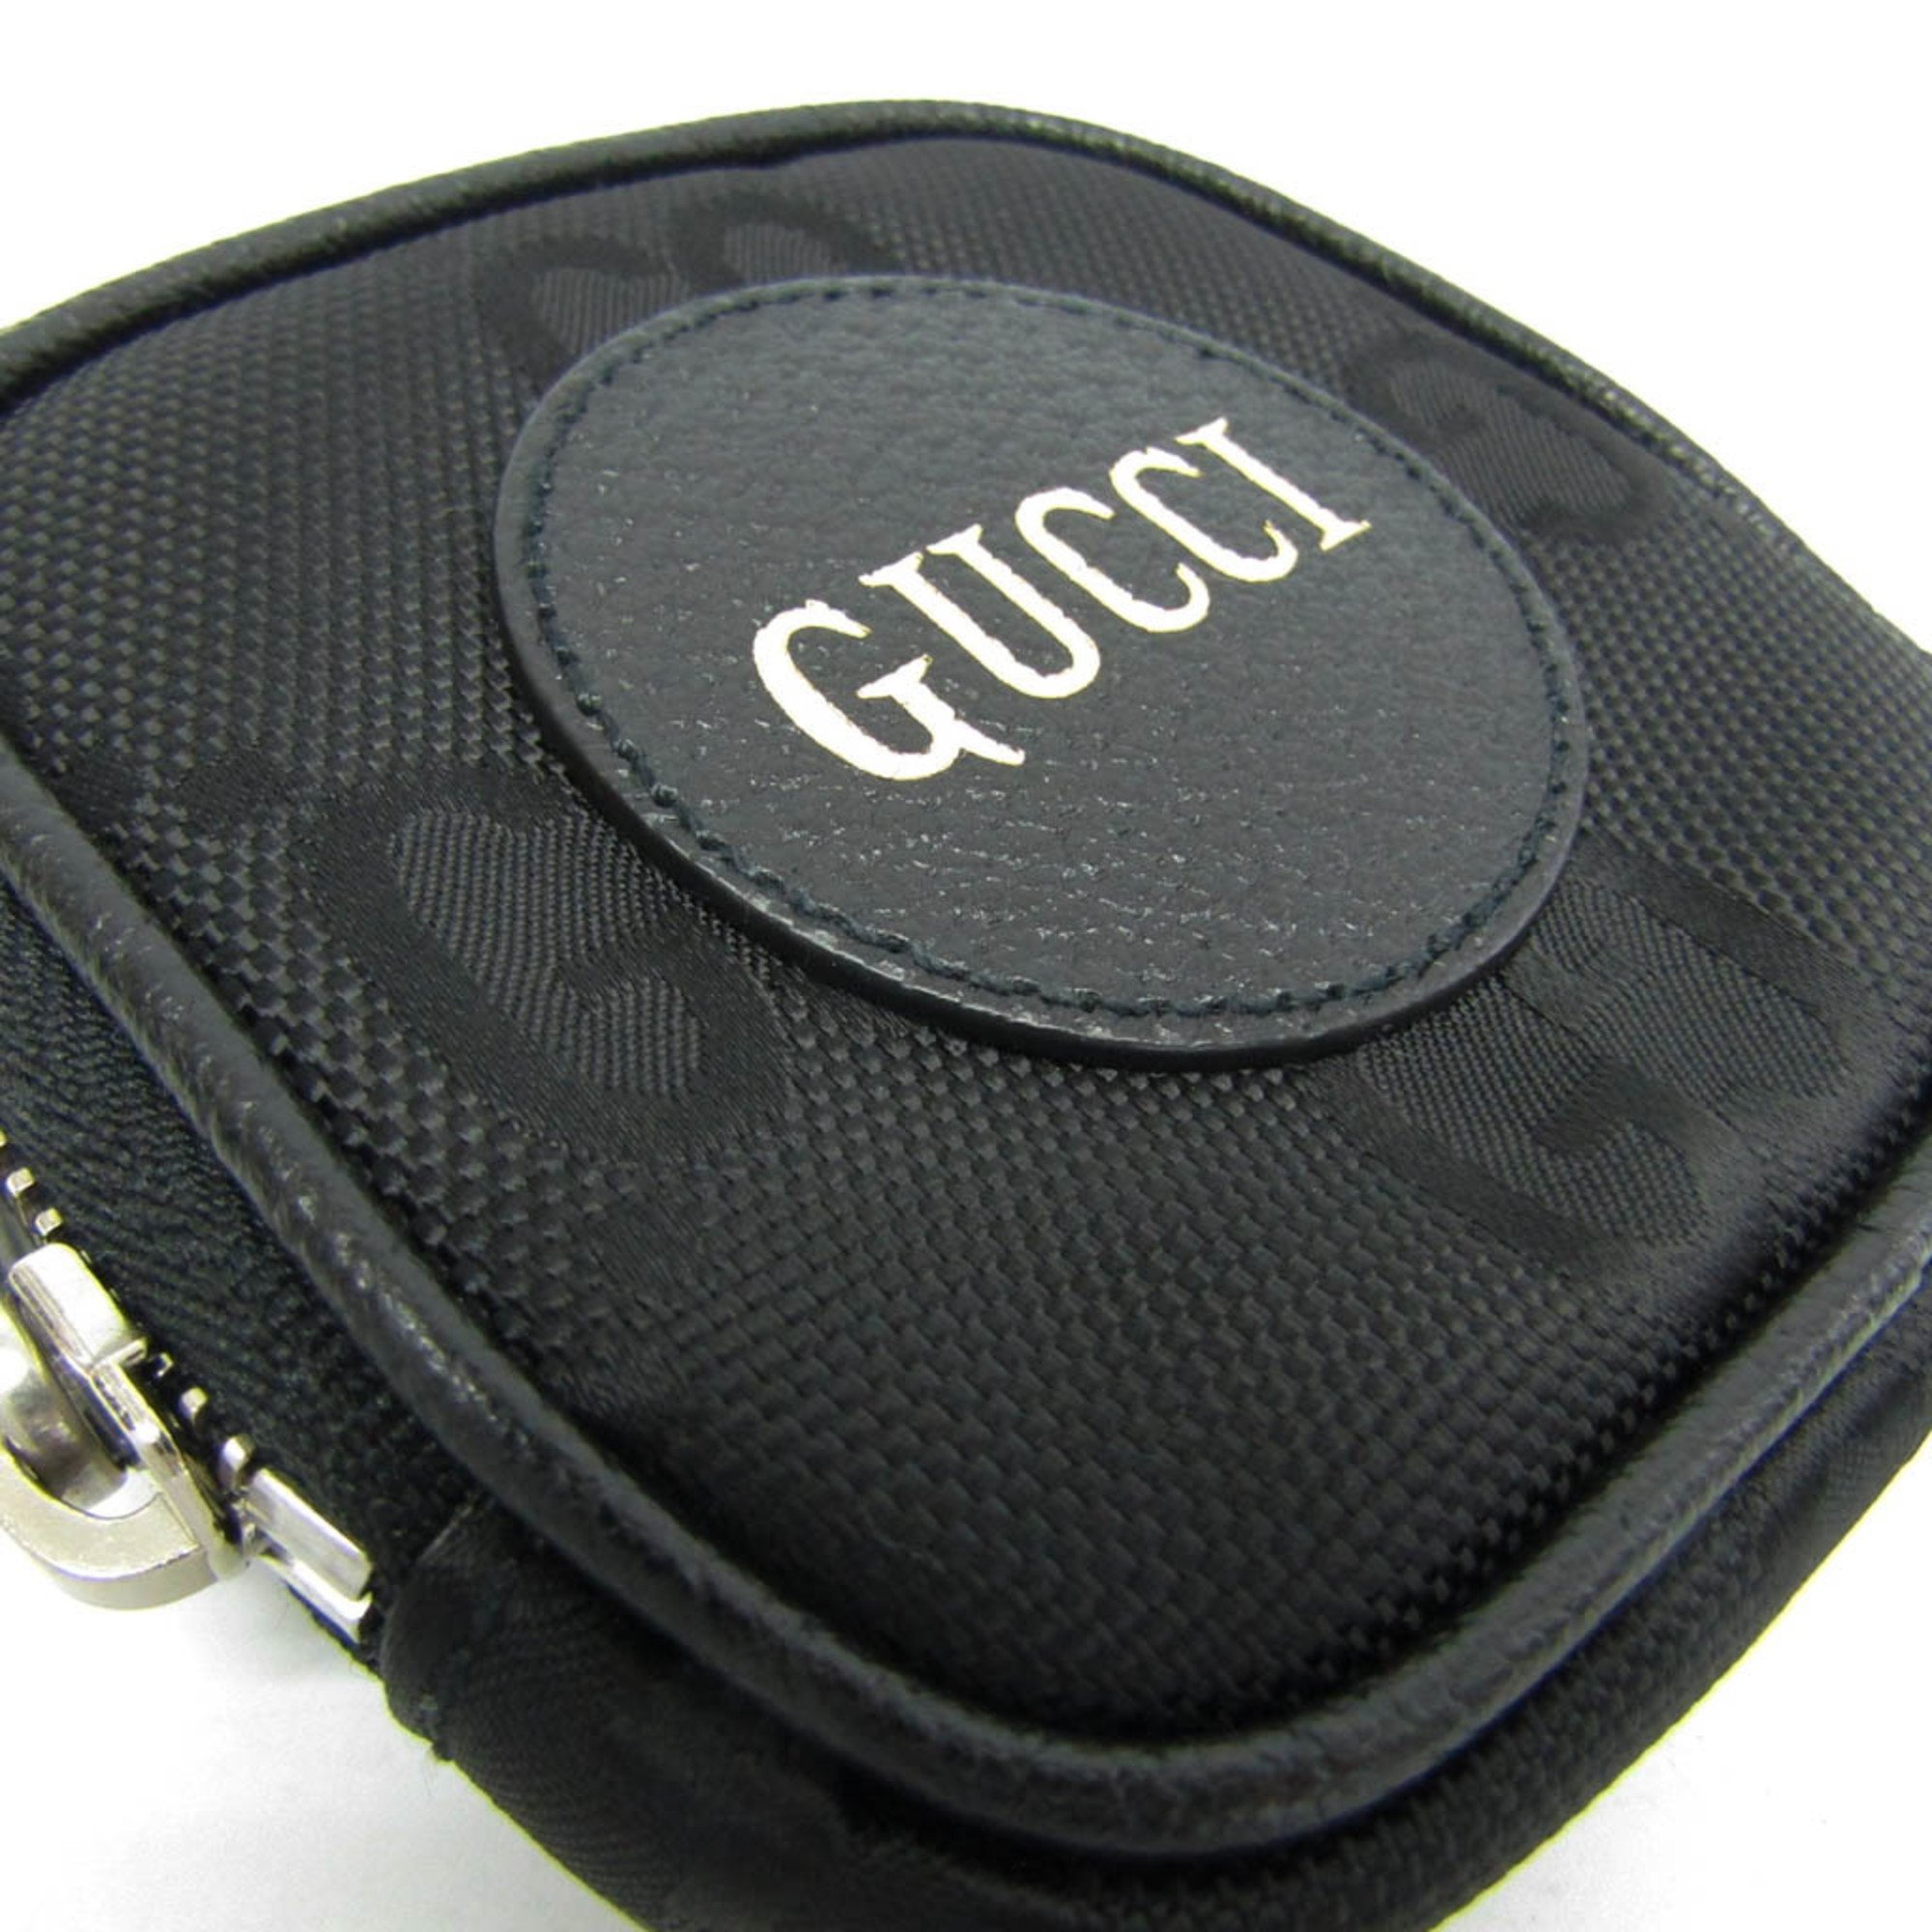 Gucci Off The Grid 645060 Women,Men Canvas,Leather Coin Purse/coin Case Black